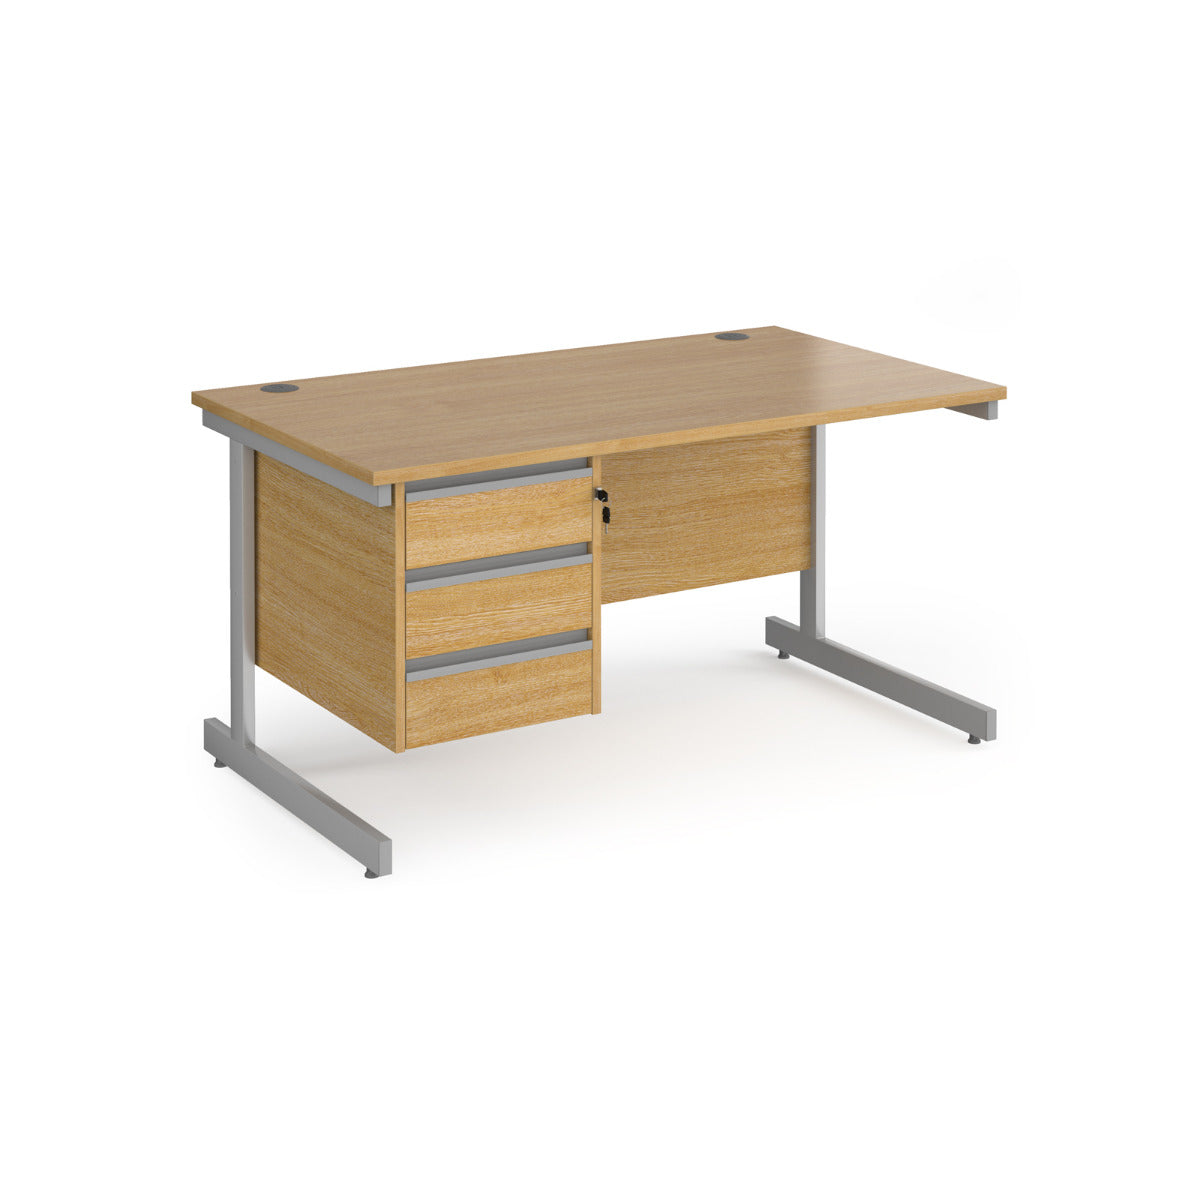 Contract Cantilever Leg Straight Office Desk with Three Drawer Storage